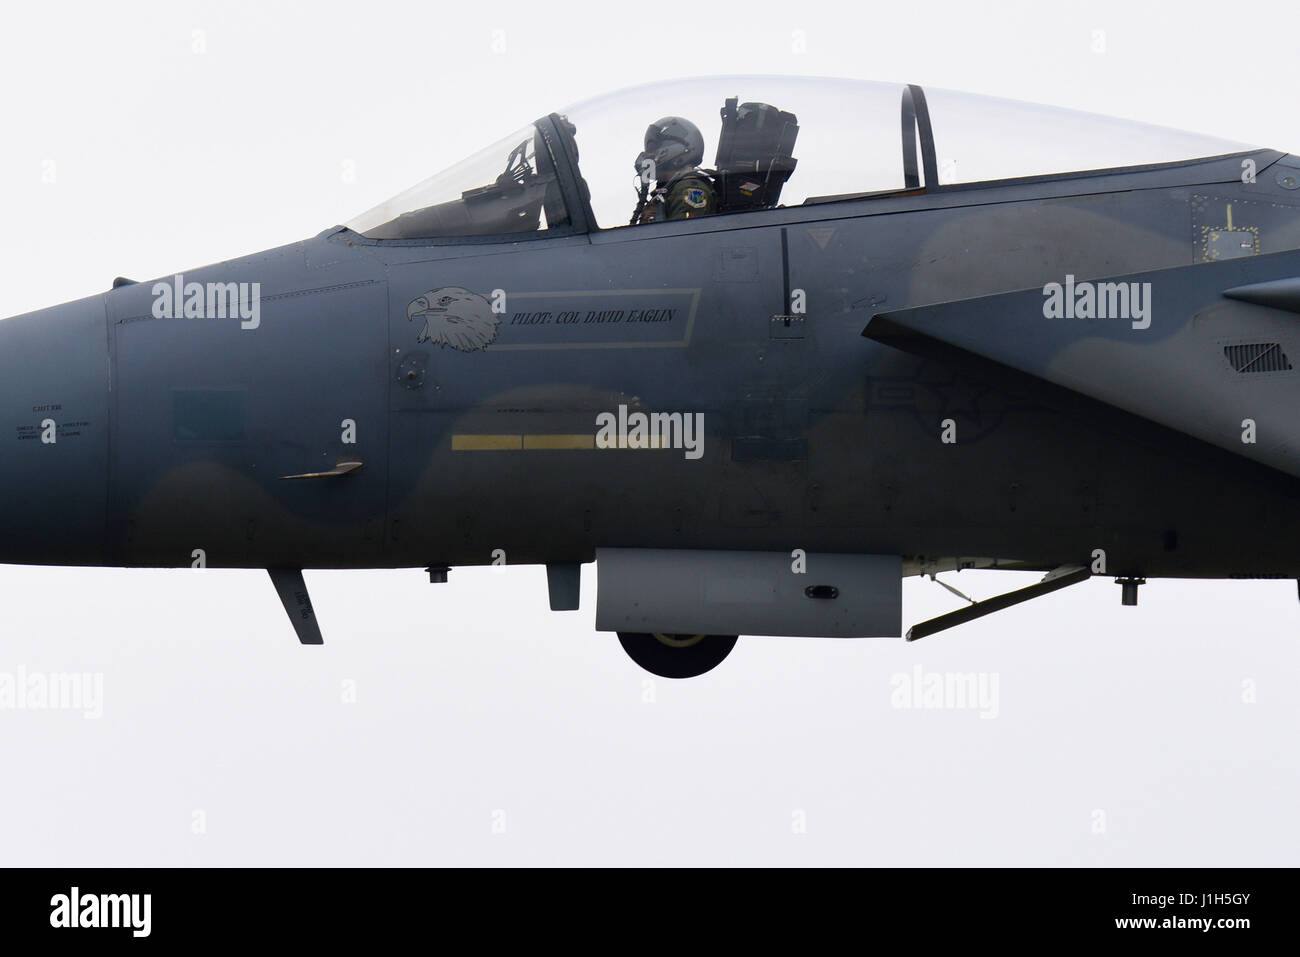 United States Air Force Boeing MDD F-15 Eagles of 493rd Fighter Squadron 'Grim Reapers' bei RAF Lakenheath, Suffolk, Großbritannien Stockfoto